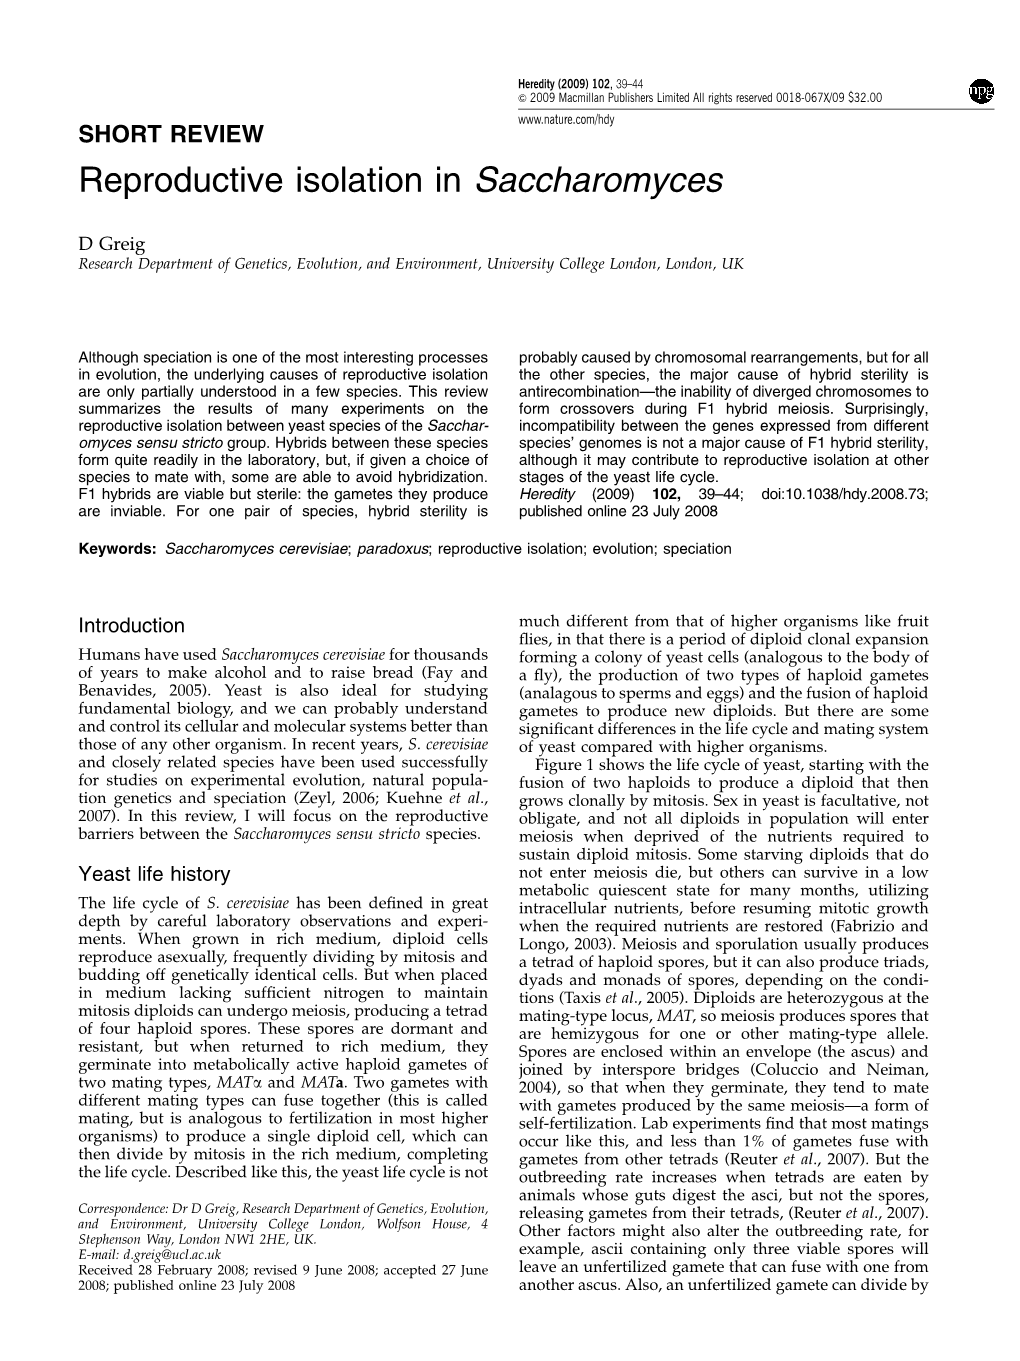 Reproductive Isolation in Saccharomyces